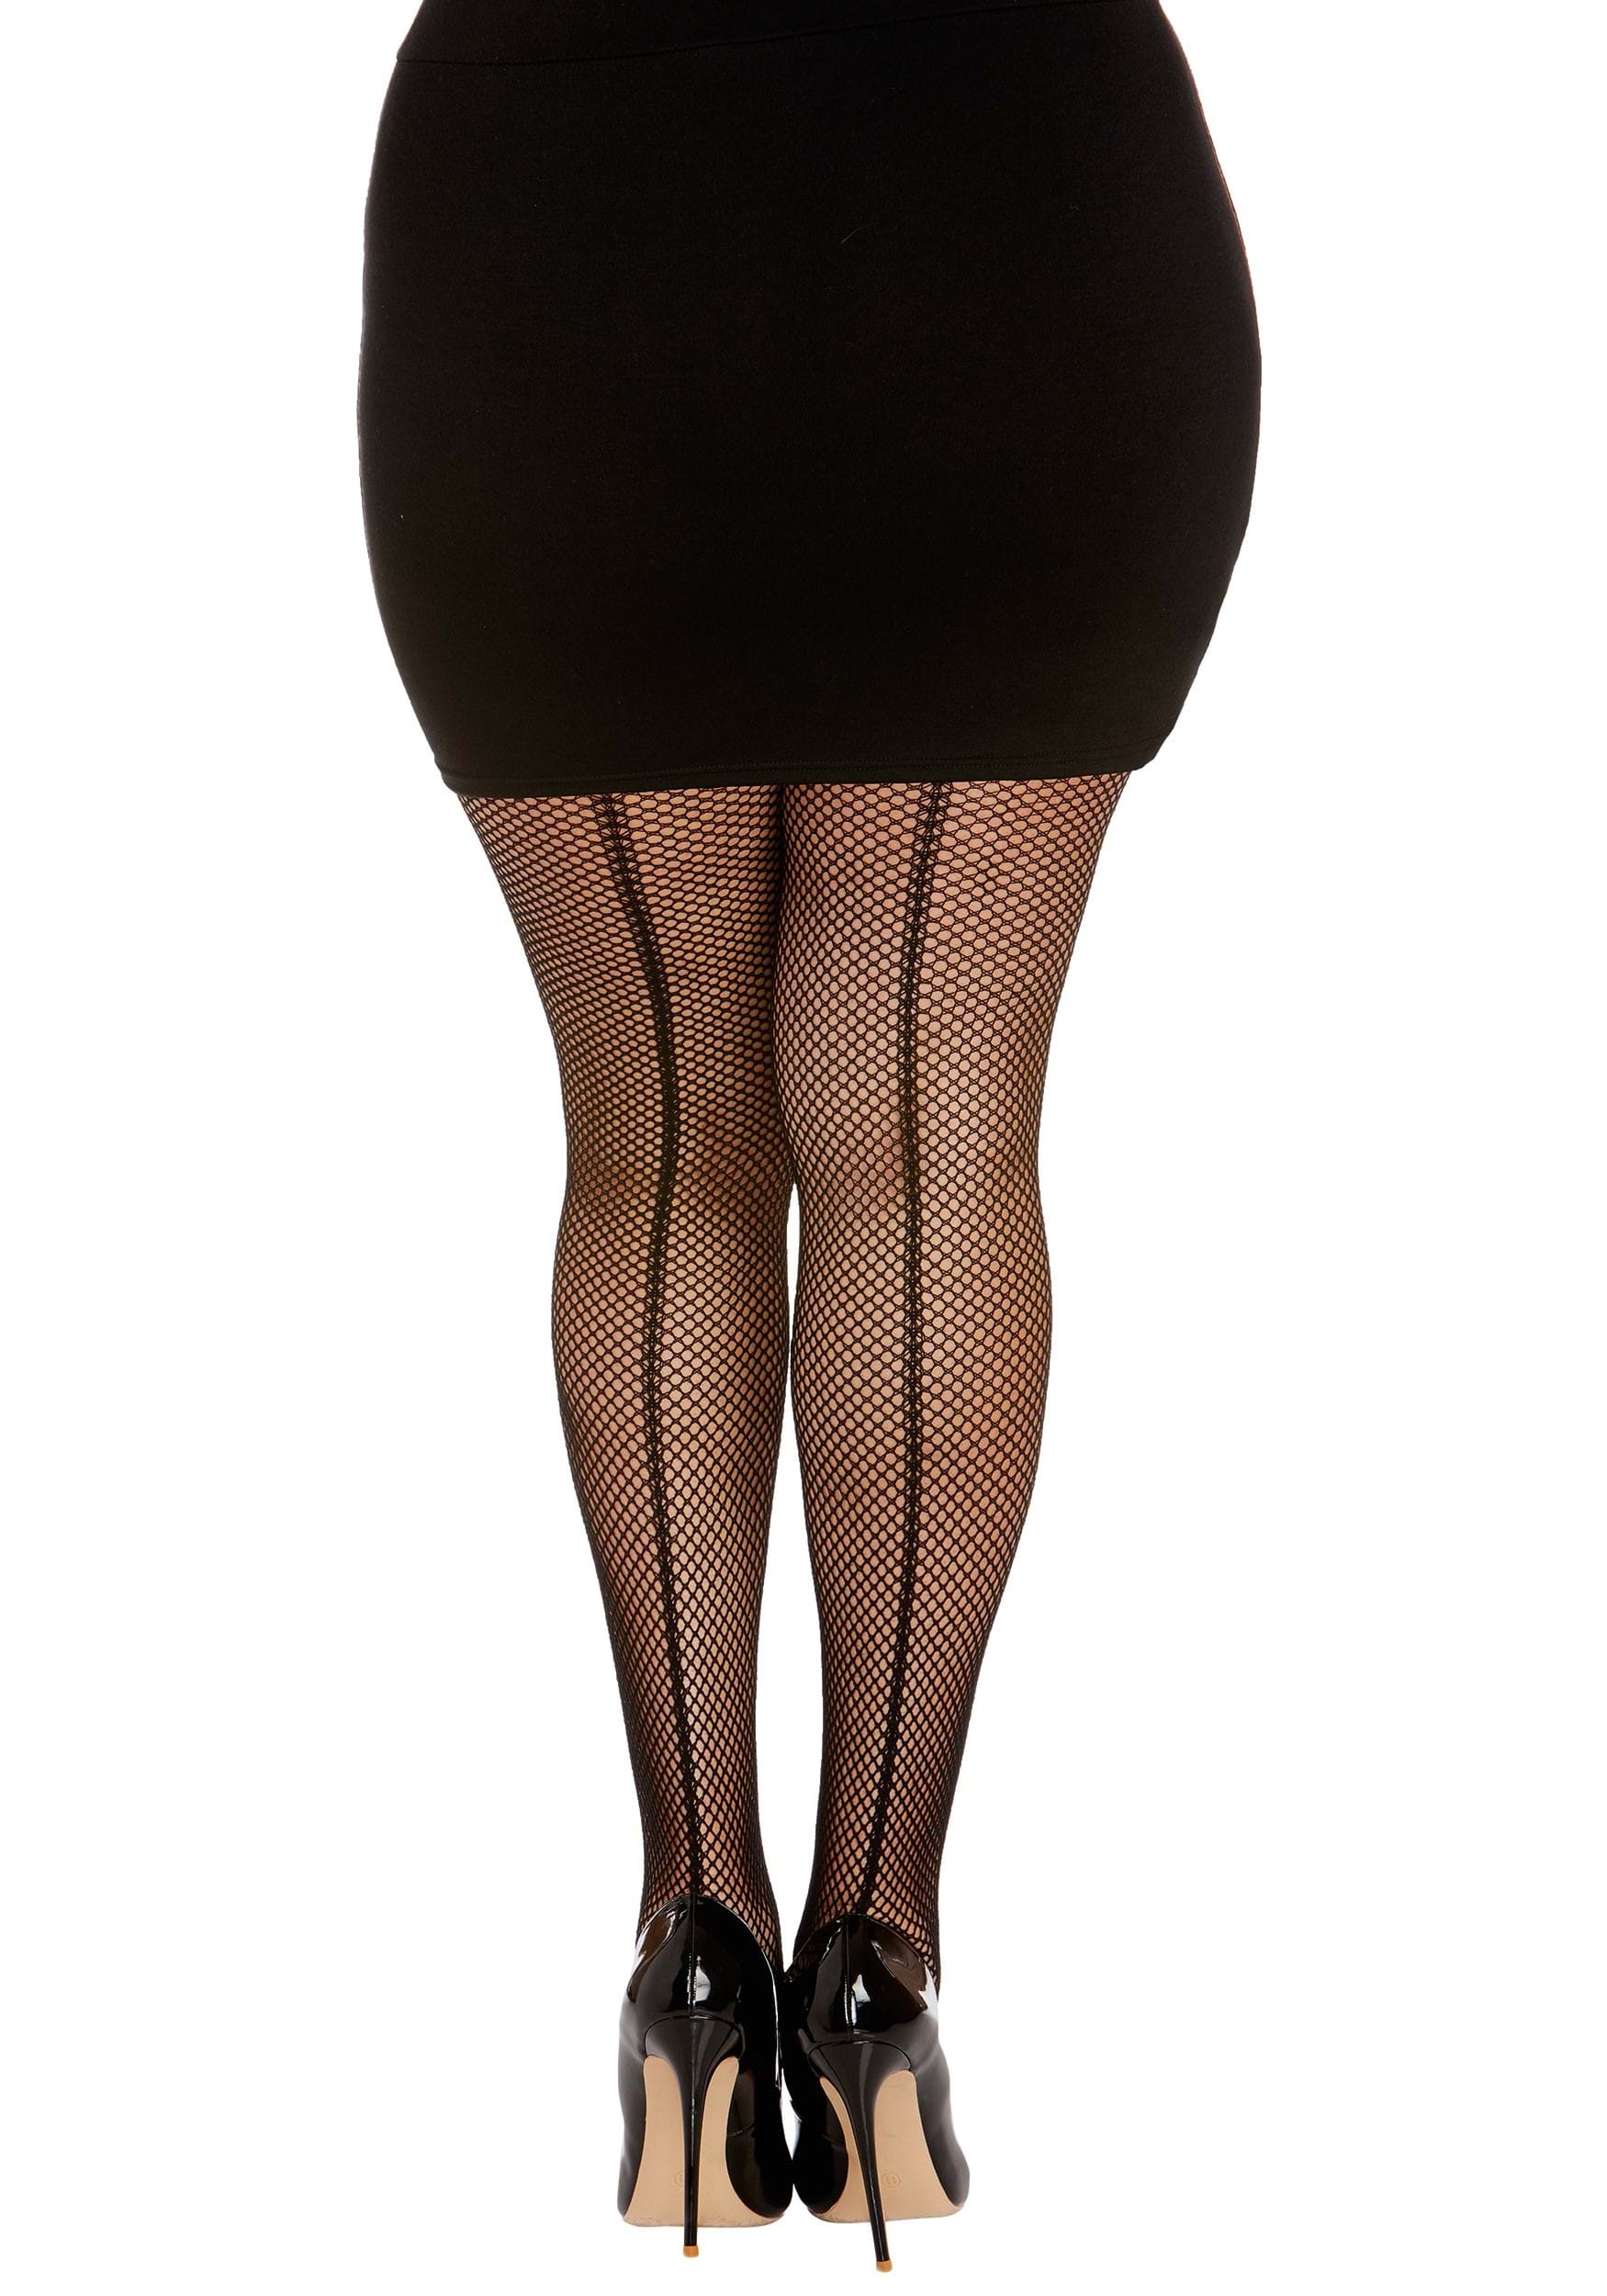 Plus Size Fishnet Tights - Black, With Back Seam - Norcostco, Inc.